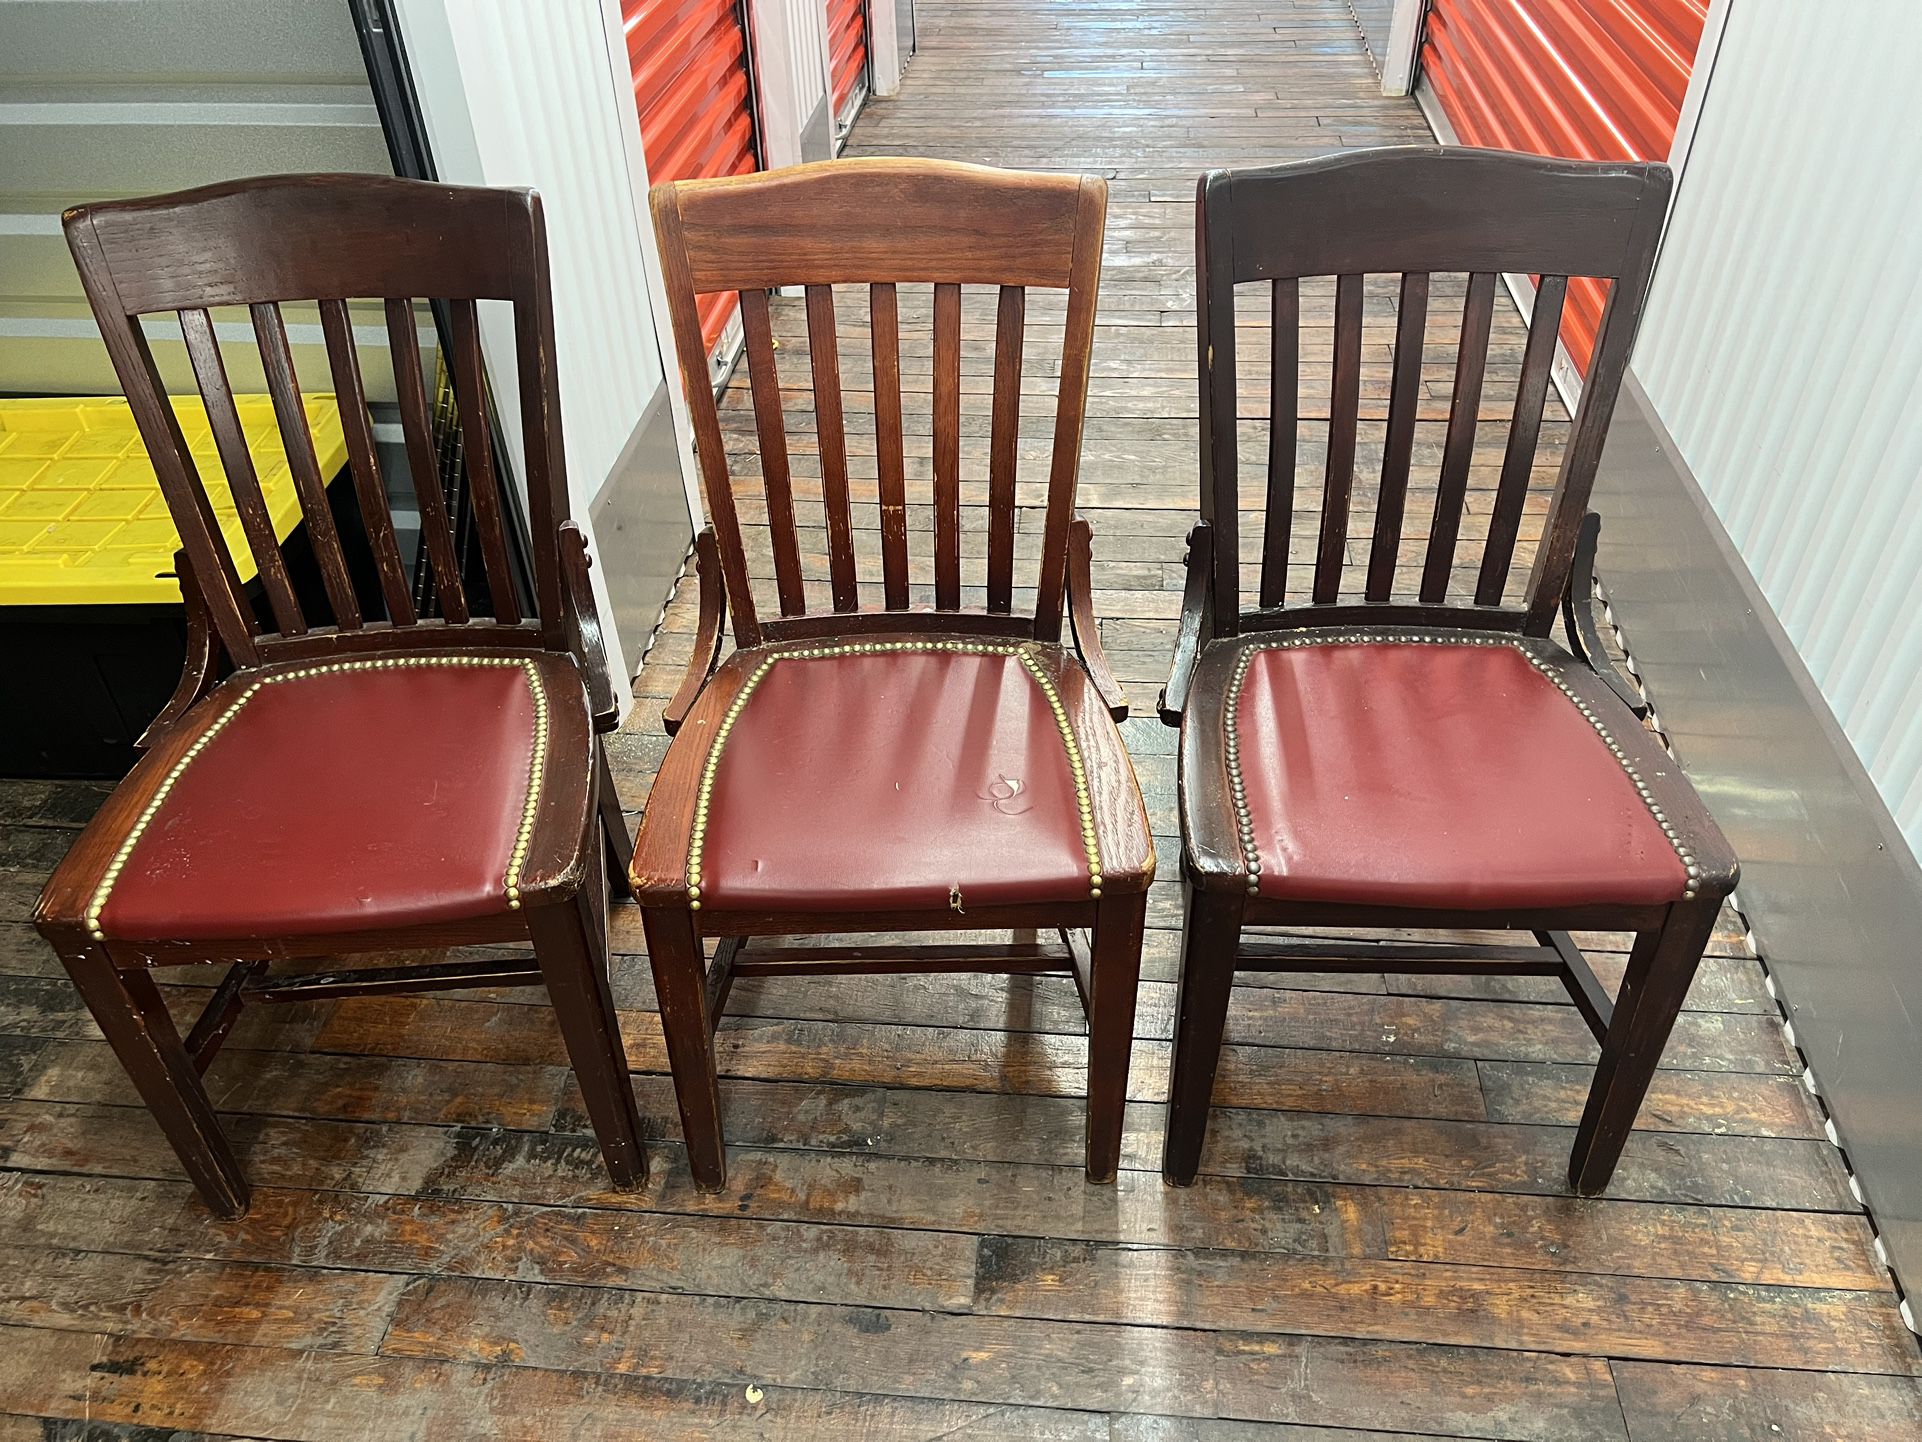 Three Vintage Very Sturdy Wooden Chairs 